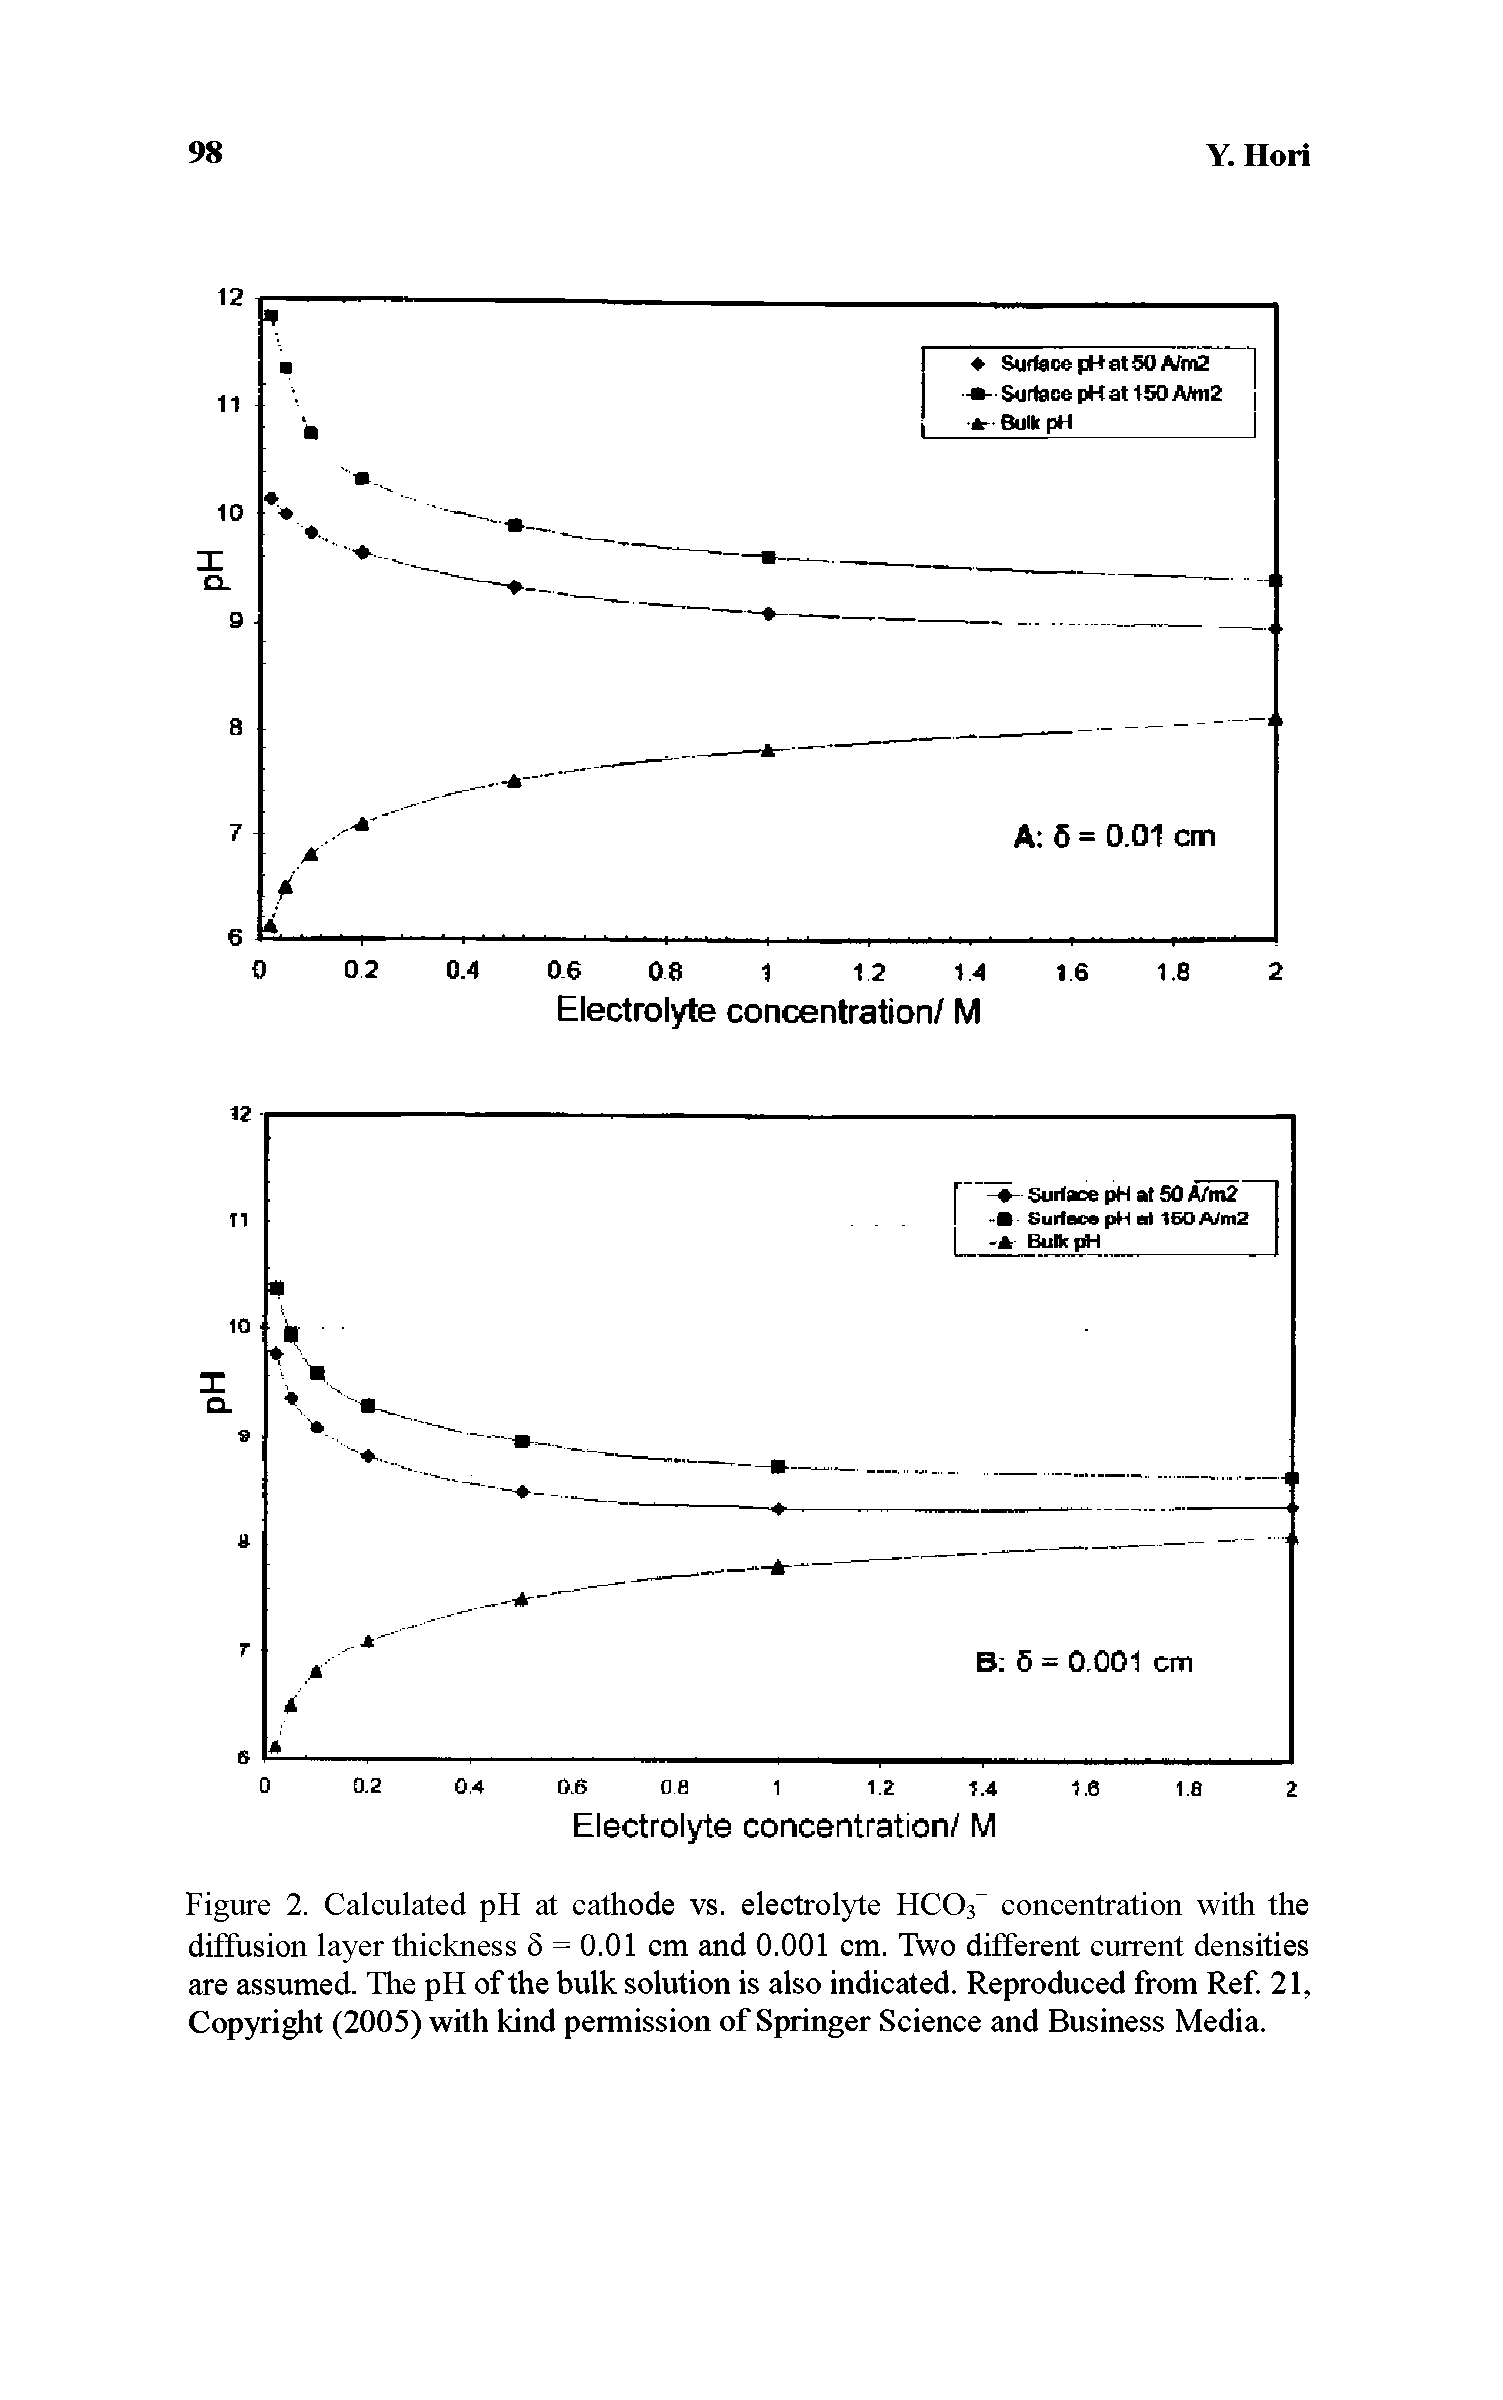 Figure 2. Calculated pH at cathode vs. electrolyte HCO3 concentration with the diffusion layer thickness 5 = 0.01 cm and 0.001 cm. Two different current densities are assumed. The pH of the bulk solution is also indicated. Reproduced from Ref. 21, Copyright (2005) with kind permission of Springer Science and Business Media.